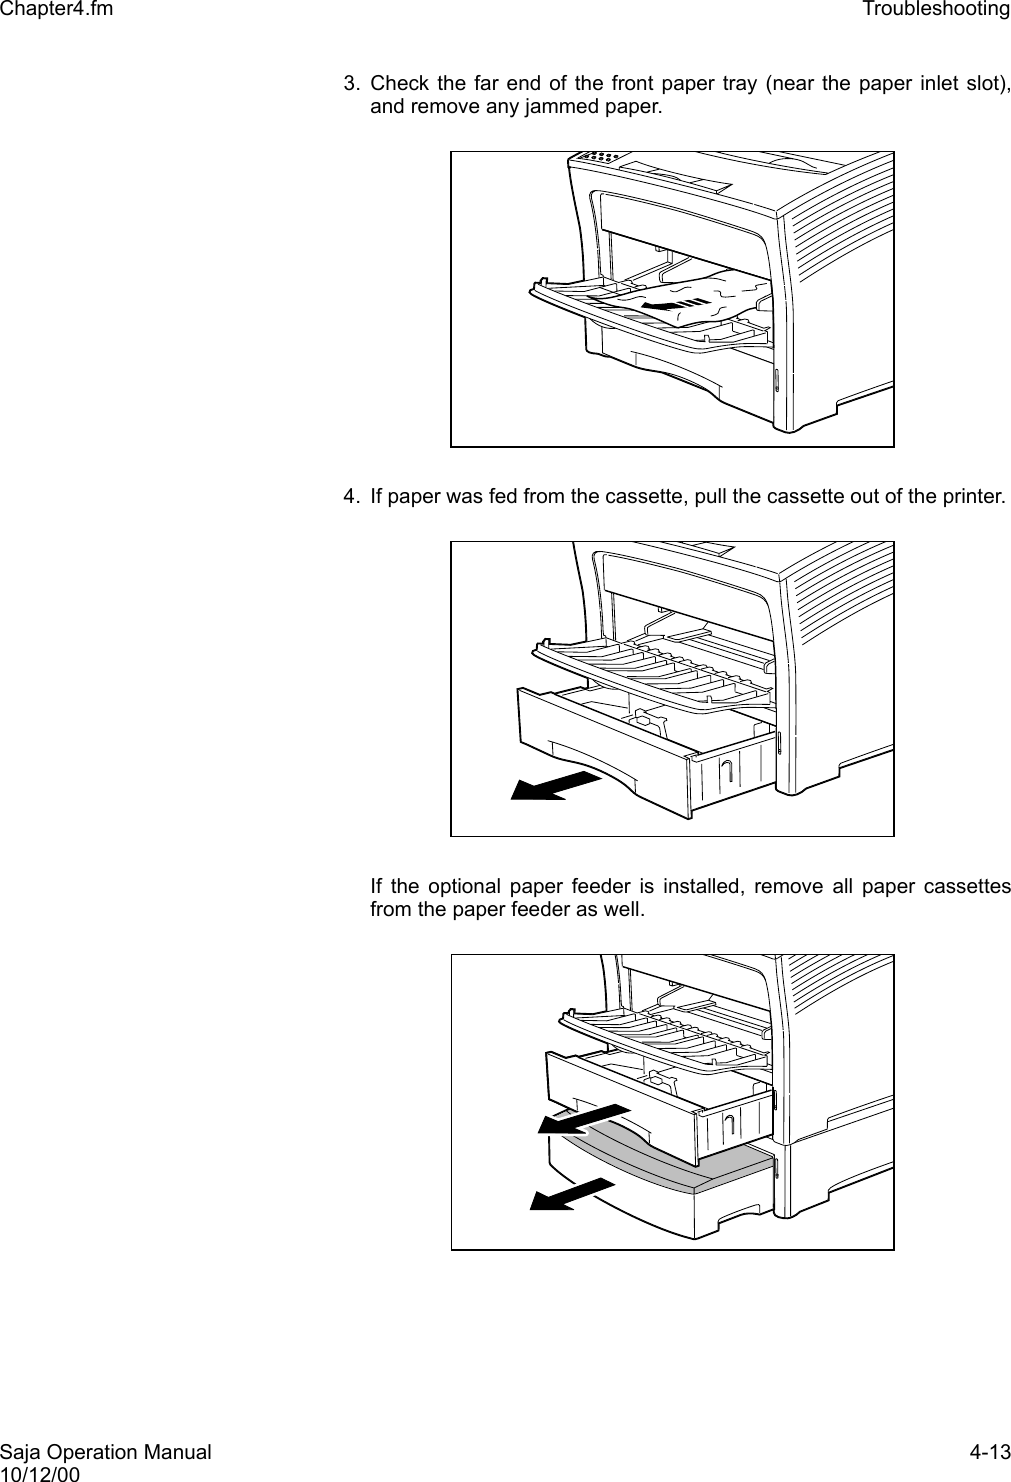 Saja Operation Manual 4-1310/12/00Chapter4.fm Troubleshooting 3. Check the far end of the front paper tray (near the paper inlet slot),and remove any jammed paper. 4. If paper was fed from the cassette, pull the cassette out of the printer. If the optional paper feeder is installed, remove all paper cassettesfrom the paper feeder as well.